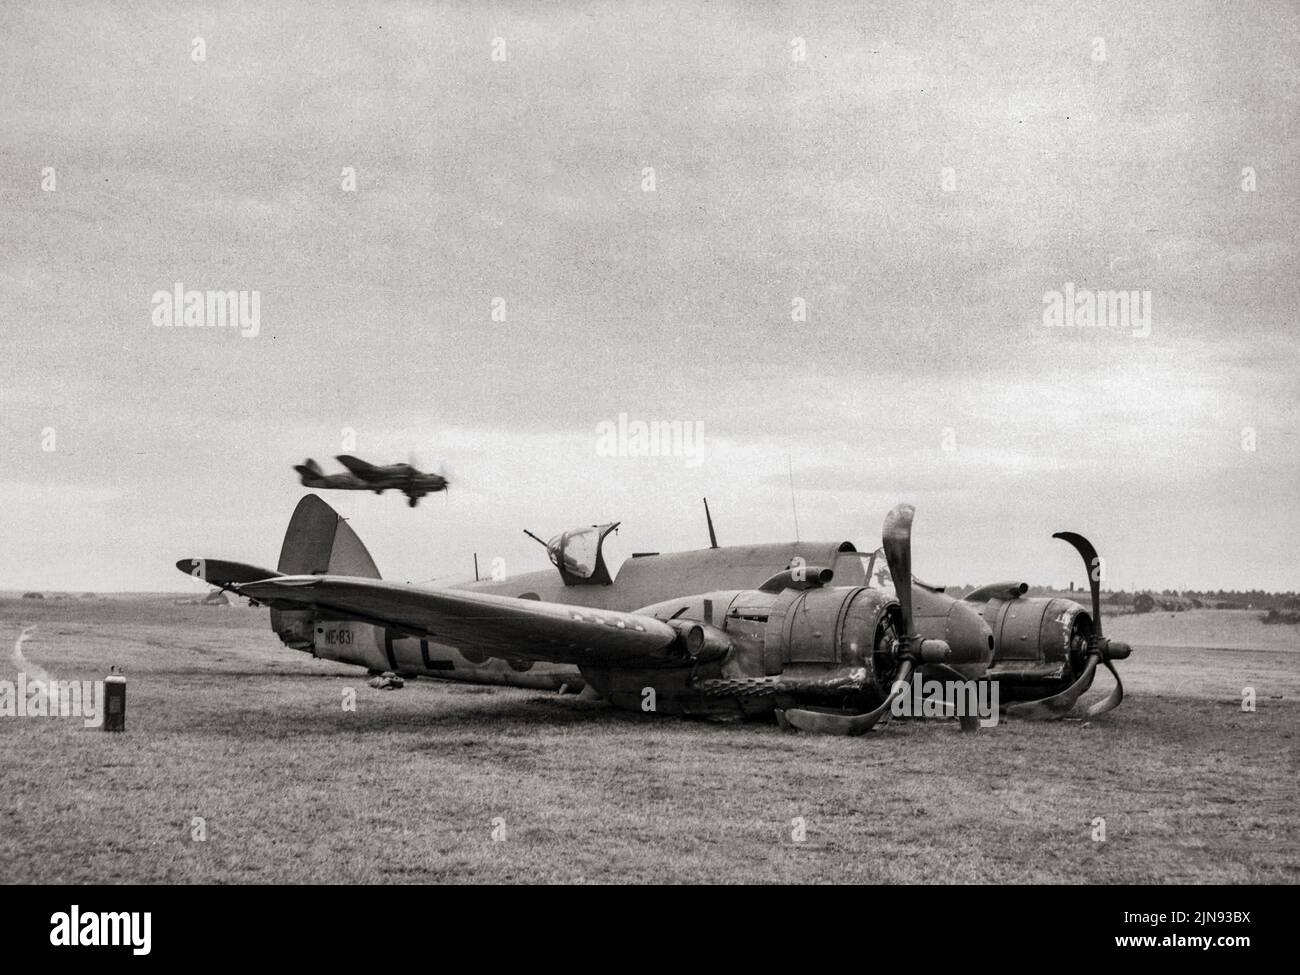 A damaged Bristol Beaufighter TF Mark X of No. 144 Squadron RAF, at rest after crash-landing at Dallachy, Morayshire, on returning from an attack on a German destroyer Z-33 and its escorting vessels in Fordefjord, Norway, in 1945. The Bristol Beaufort was a British twin-engined torpedo bomber. They first saw service with Royal Air Force Coastal Command and then the Royal Navy Fleet Air Arm from 1940 being used as torpedo bombers, conventional bombers and mine-layers until 1942, when they were removed from active service. Stock Photo